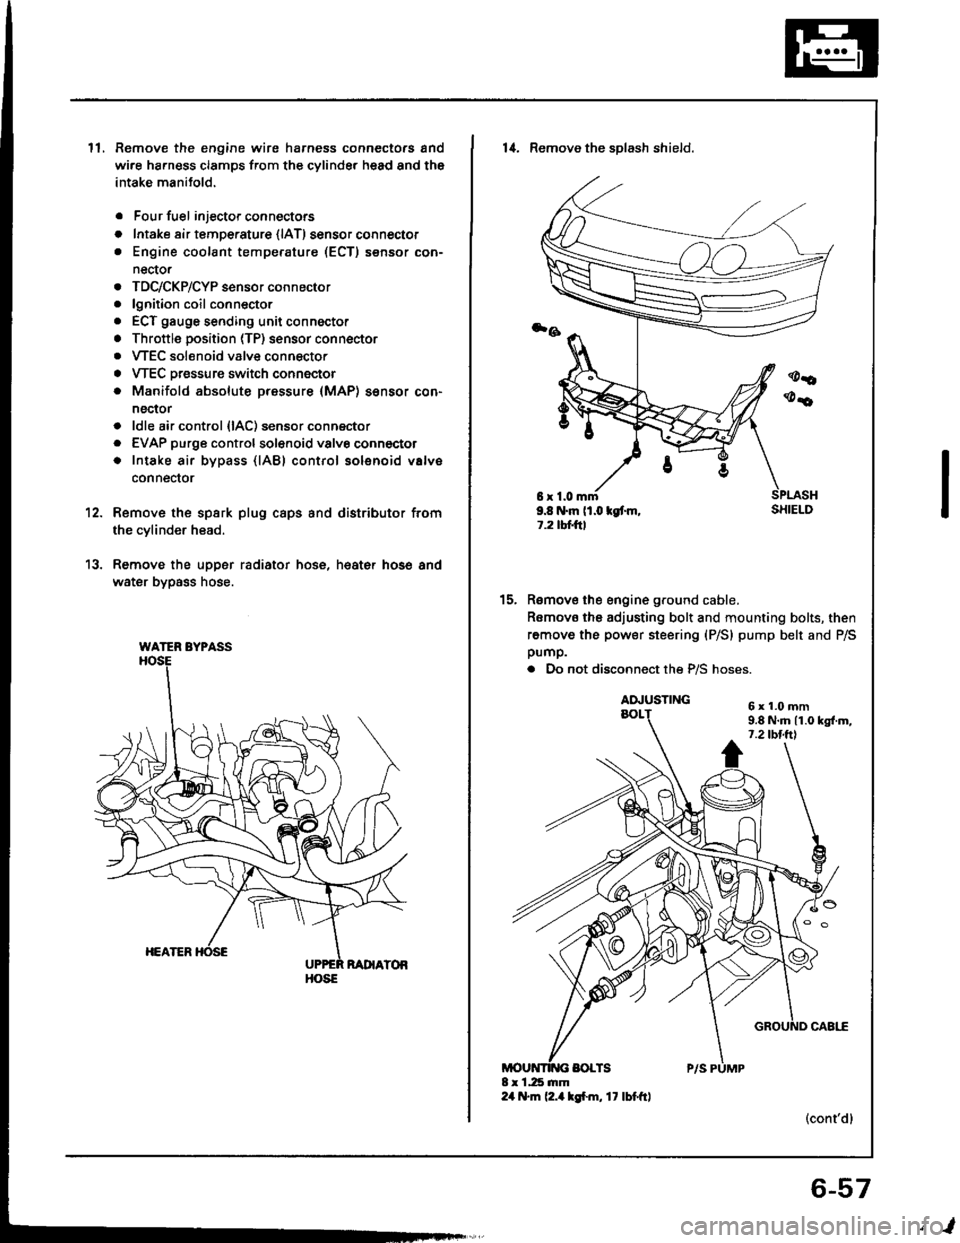 ACURA INTEGRA 1994  Service Repair Manual ll.Remove the engine wire harness connectors and
wi.e ha.ness clamps from the cylinder head and the
intake manitold.
Four fuel injector connectors
Intake air tempe.ature {lAT) sensor connector
Engine 